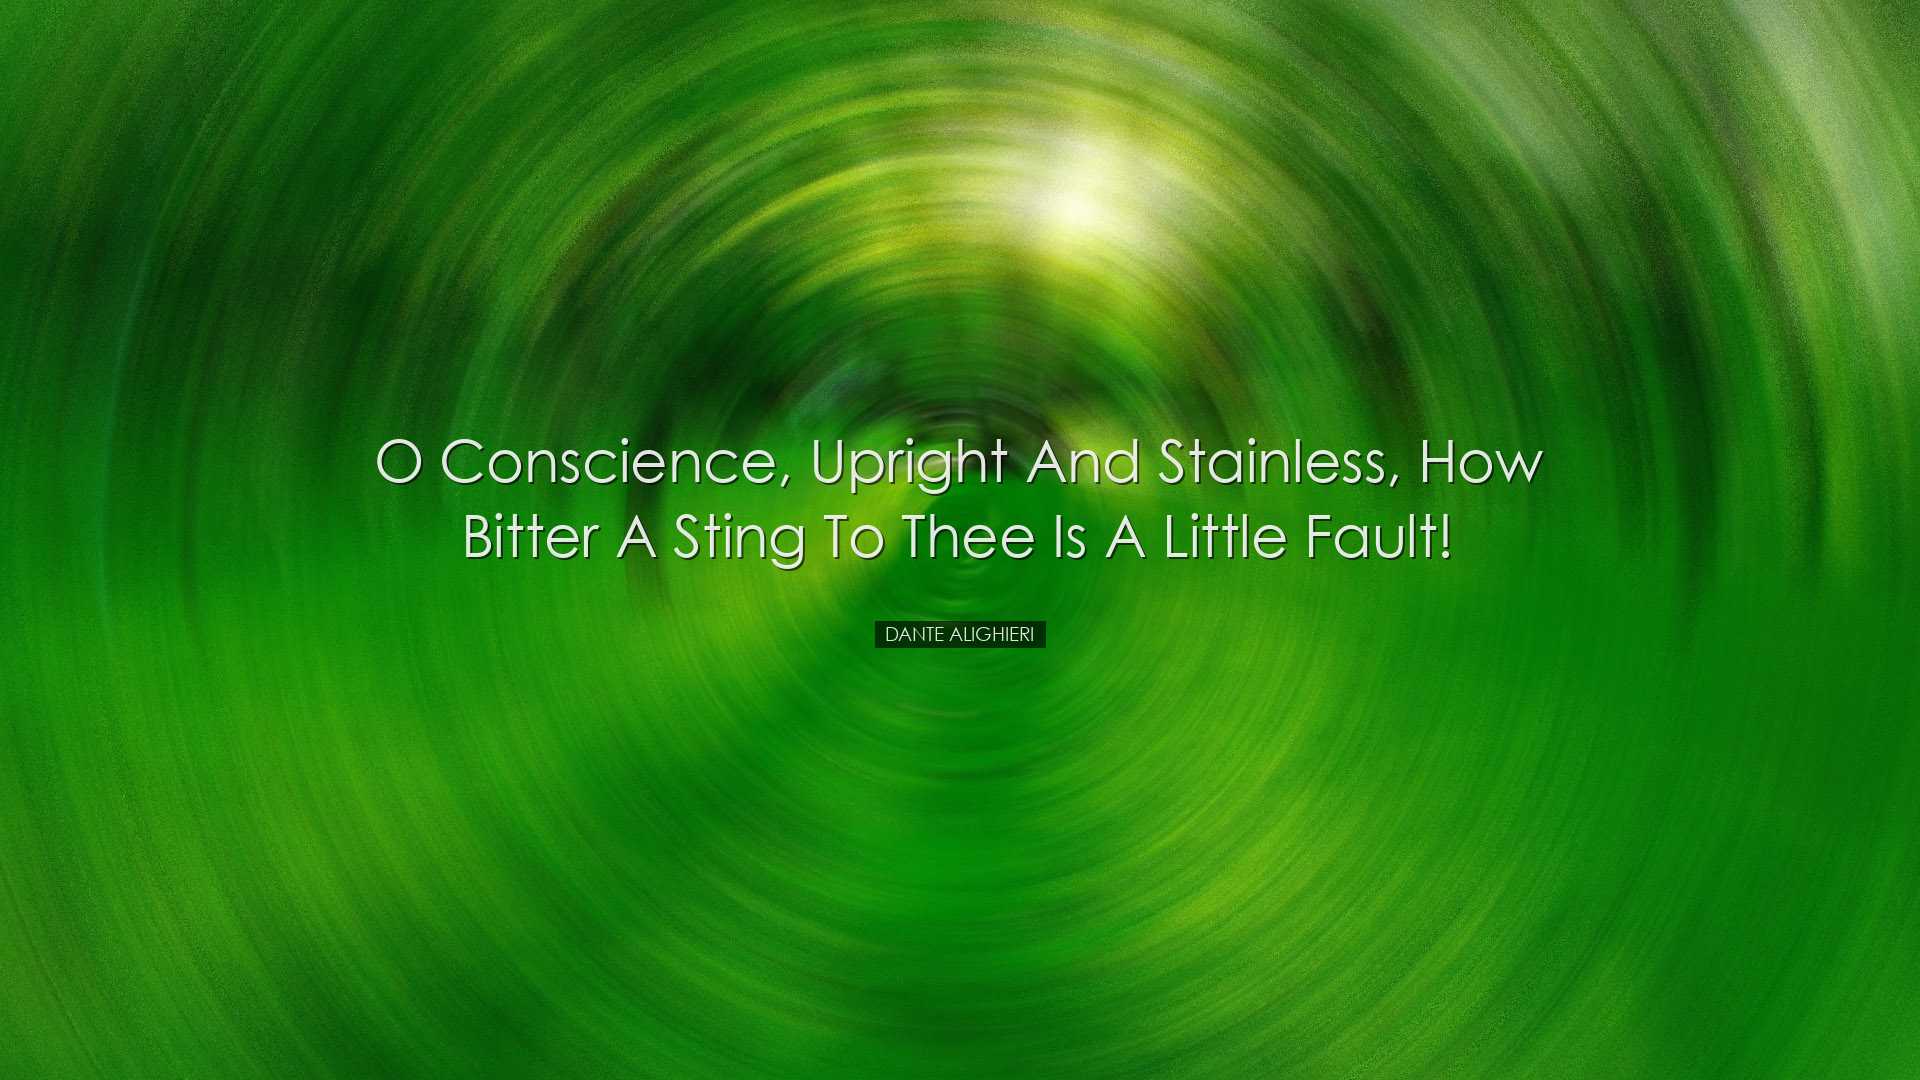 O conscience, upright and stainless, how bitter a sting to thee is